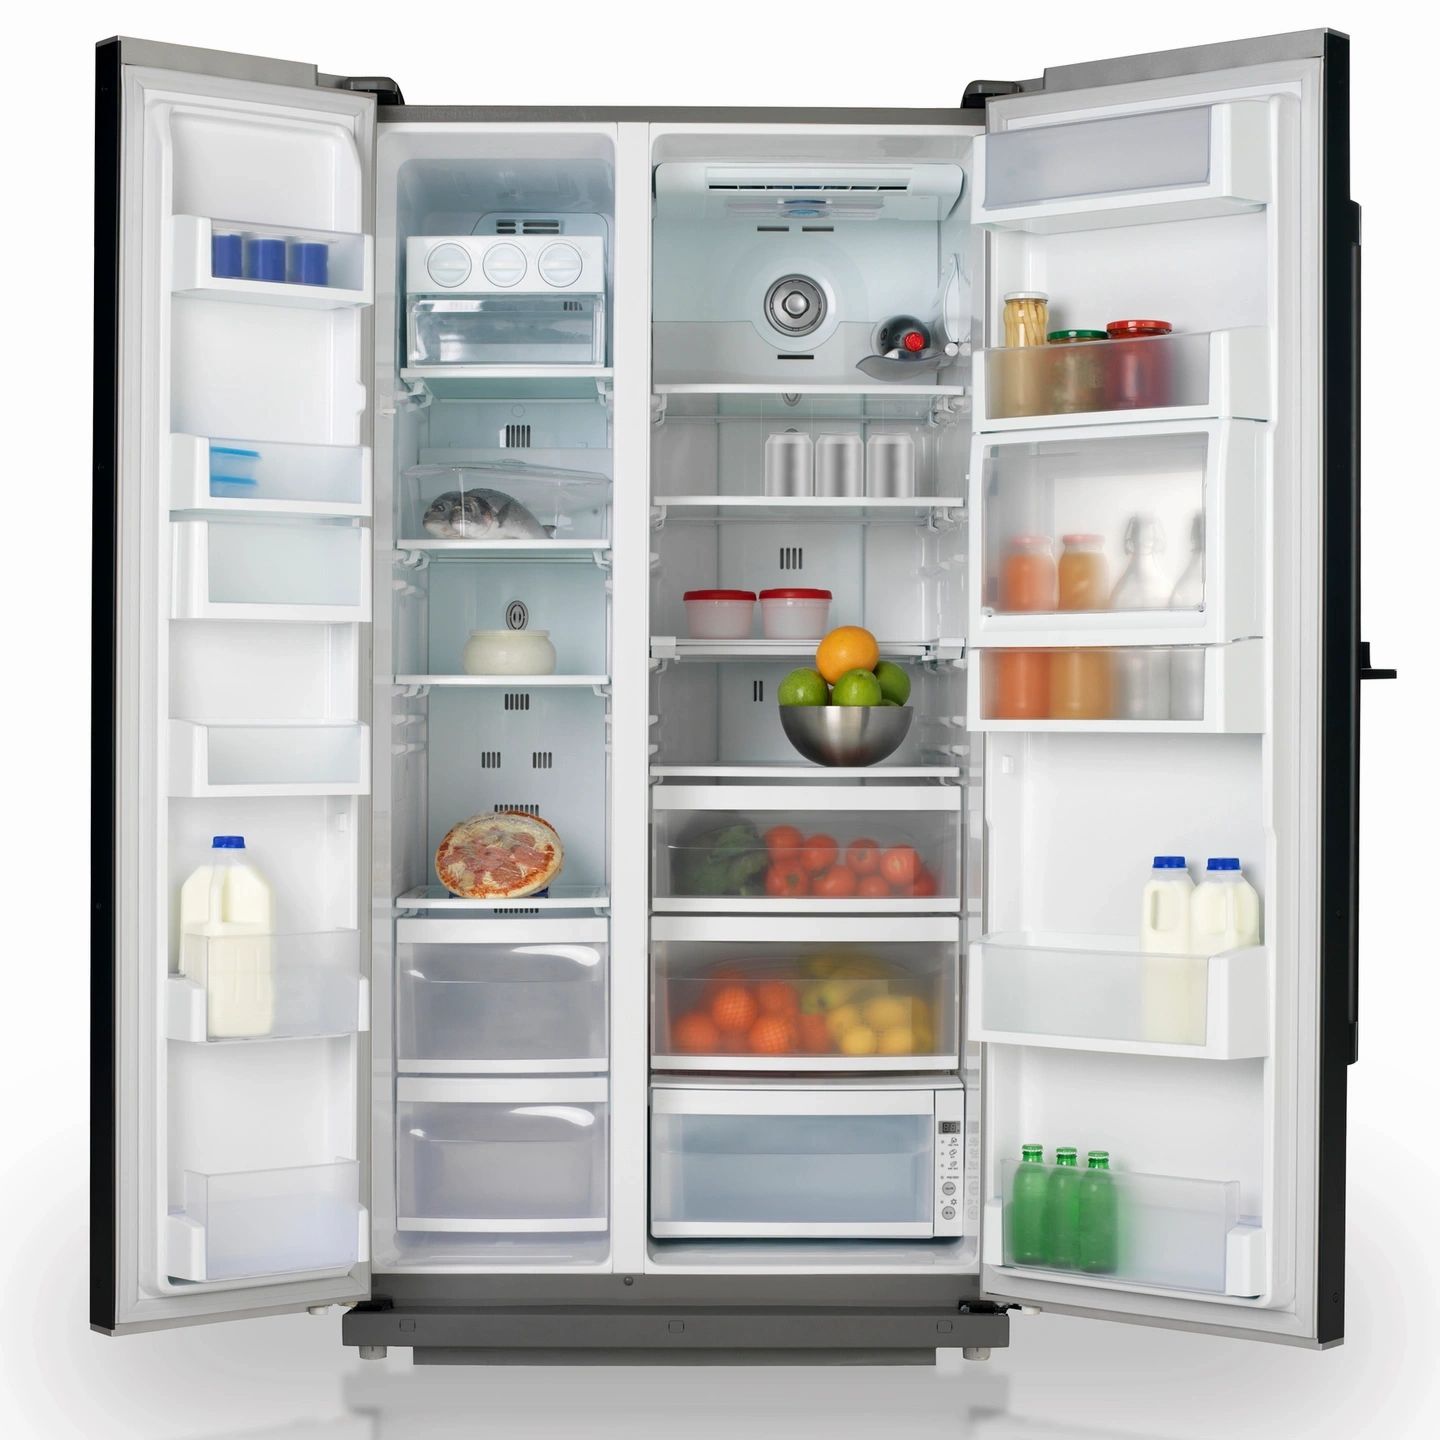 GE refrigerator repair and ge parts and accessories, Montreal, Laval